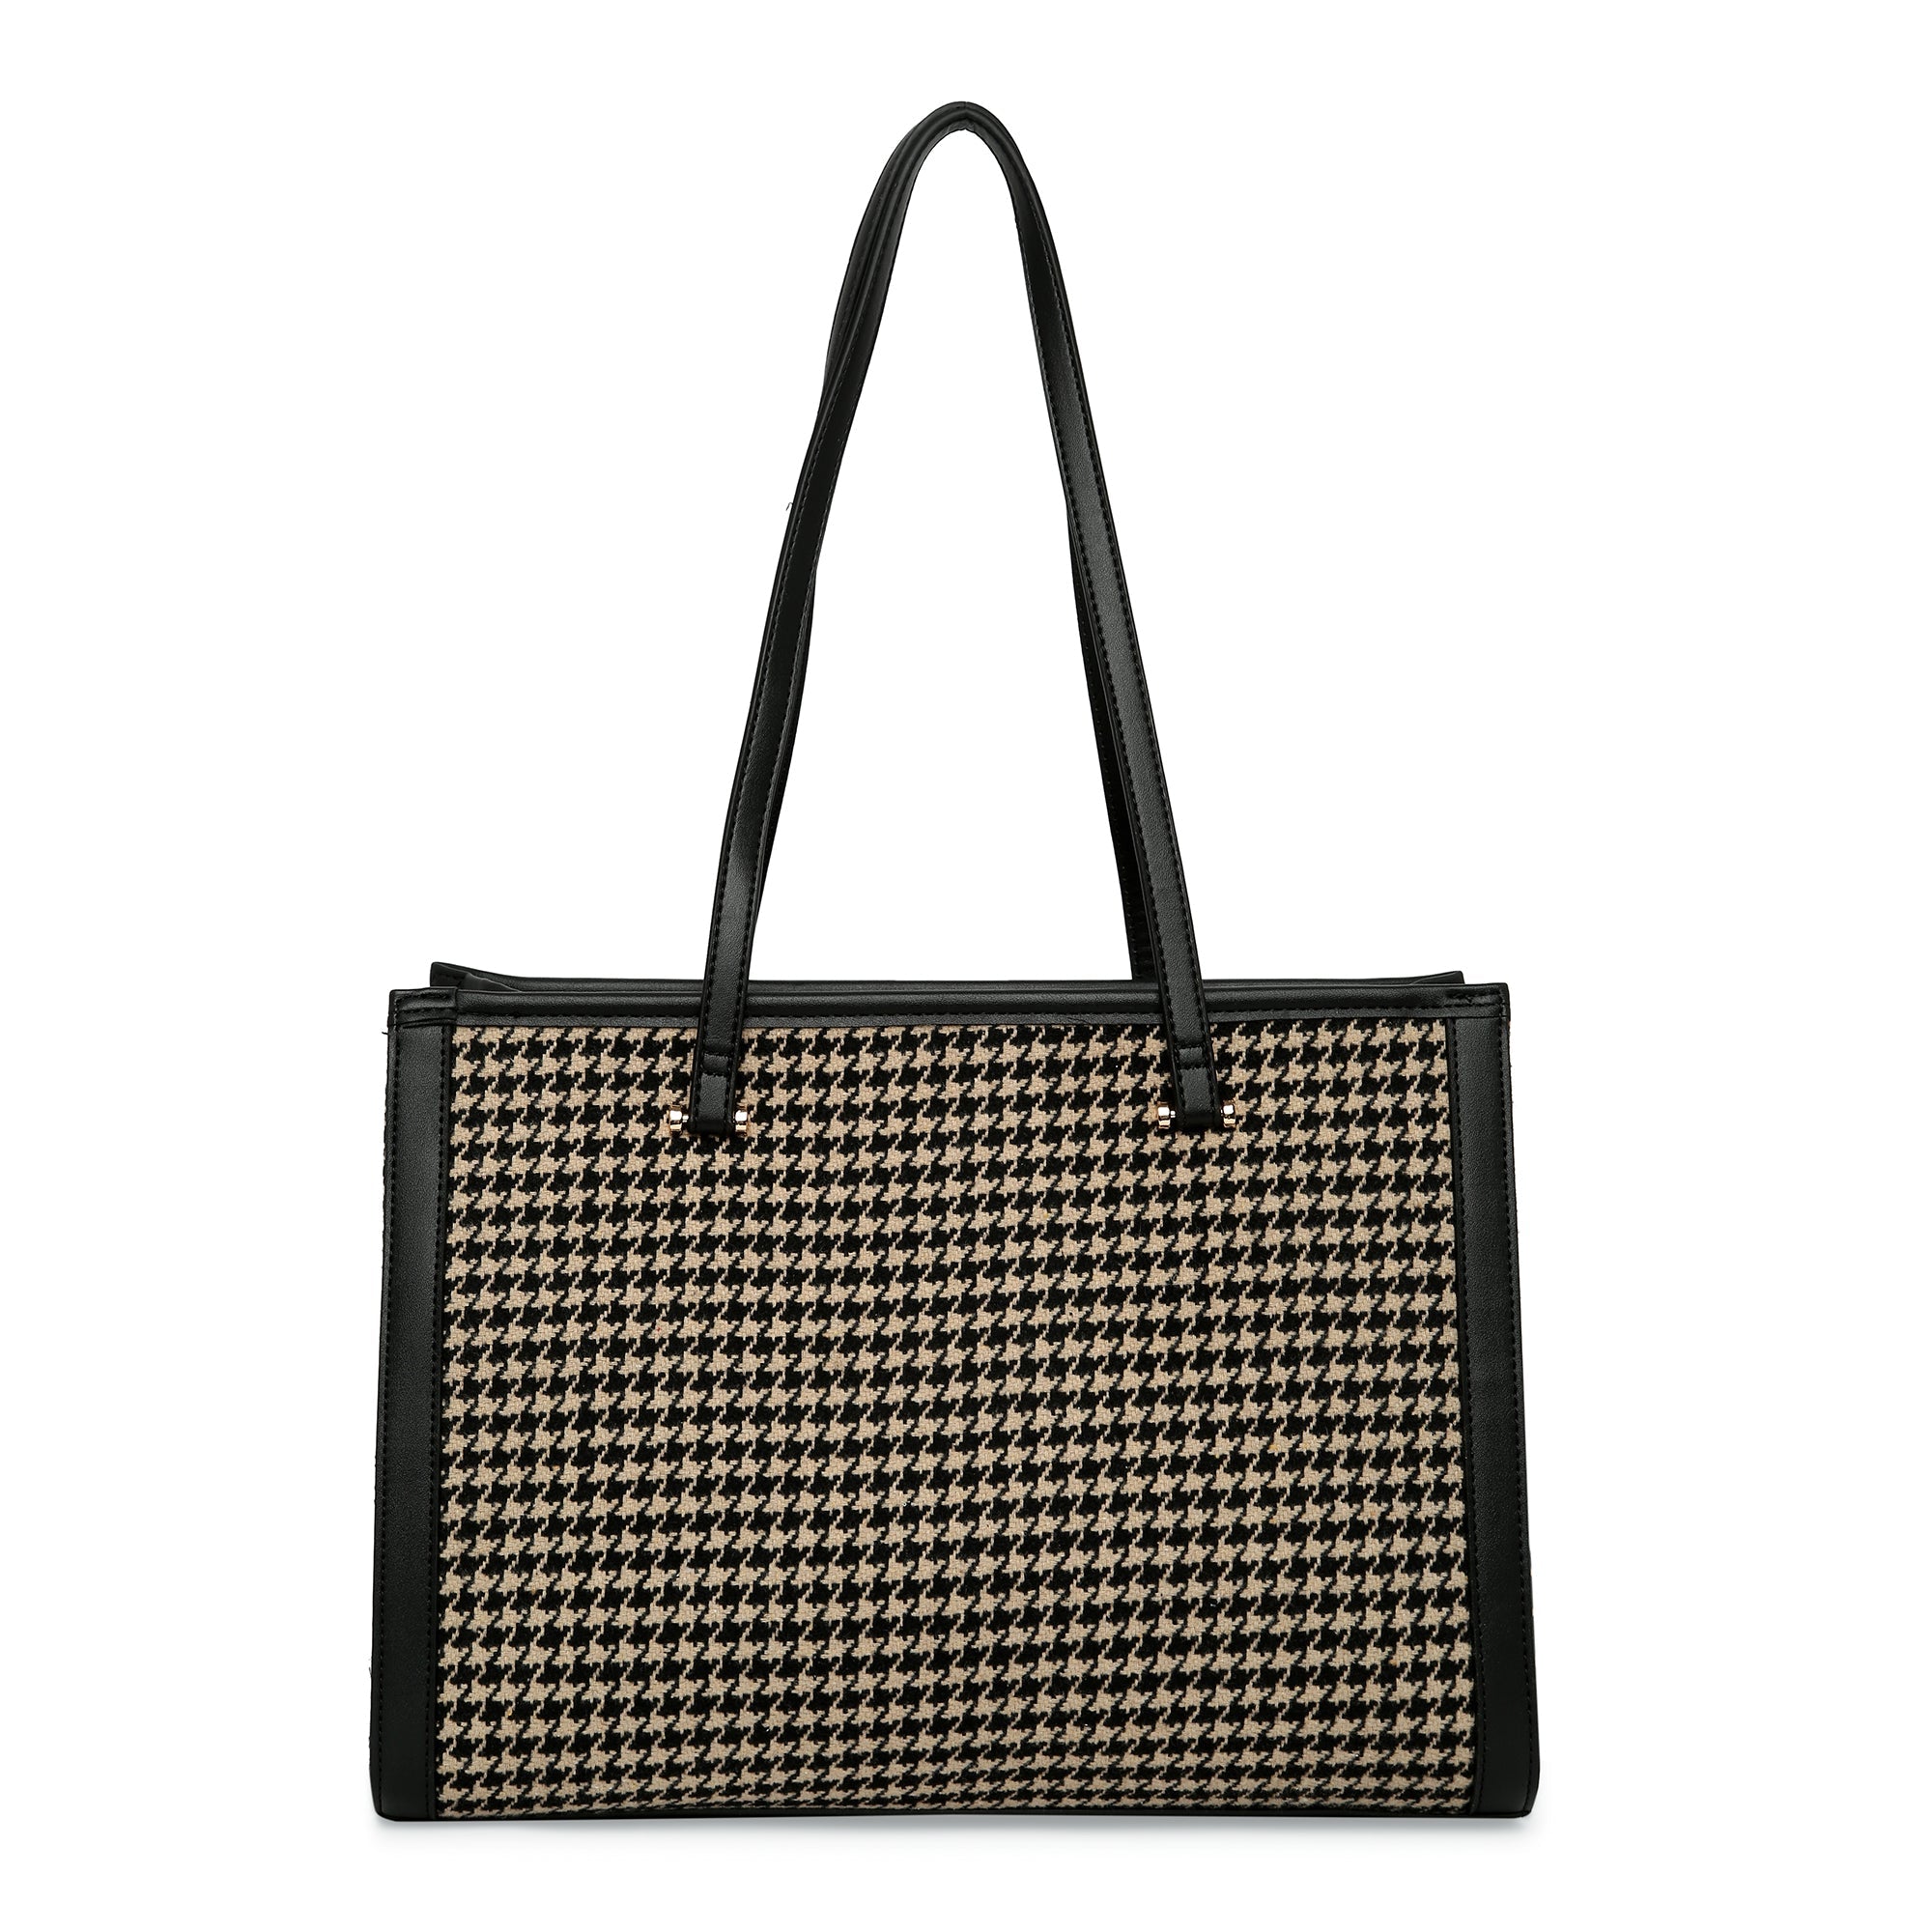 Tote Bags  Buy Tote Bags for Women Online - Accessorize India I18n Error:  Missing interpolation value page for Page {{ page }}